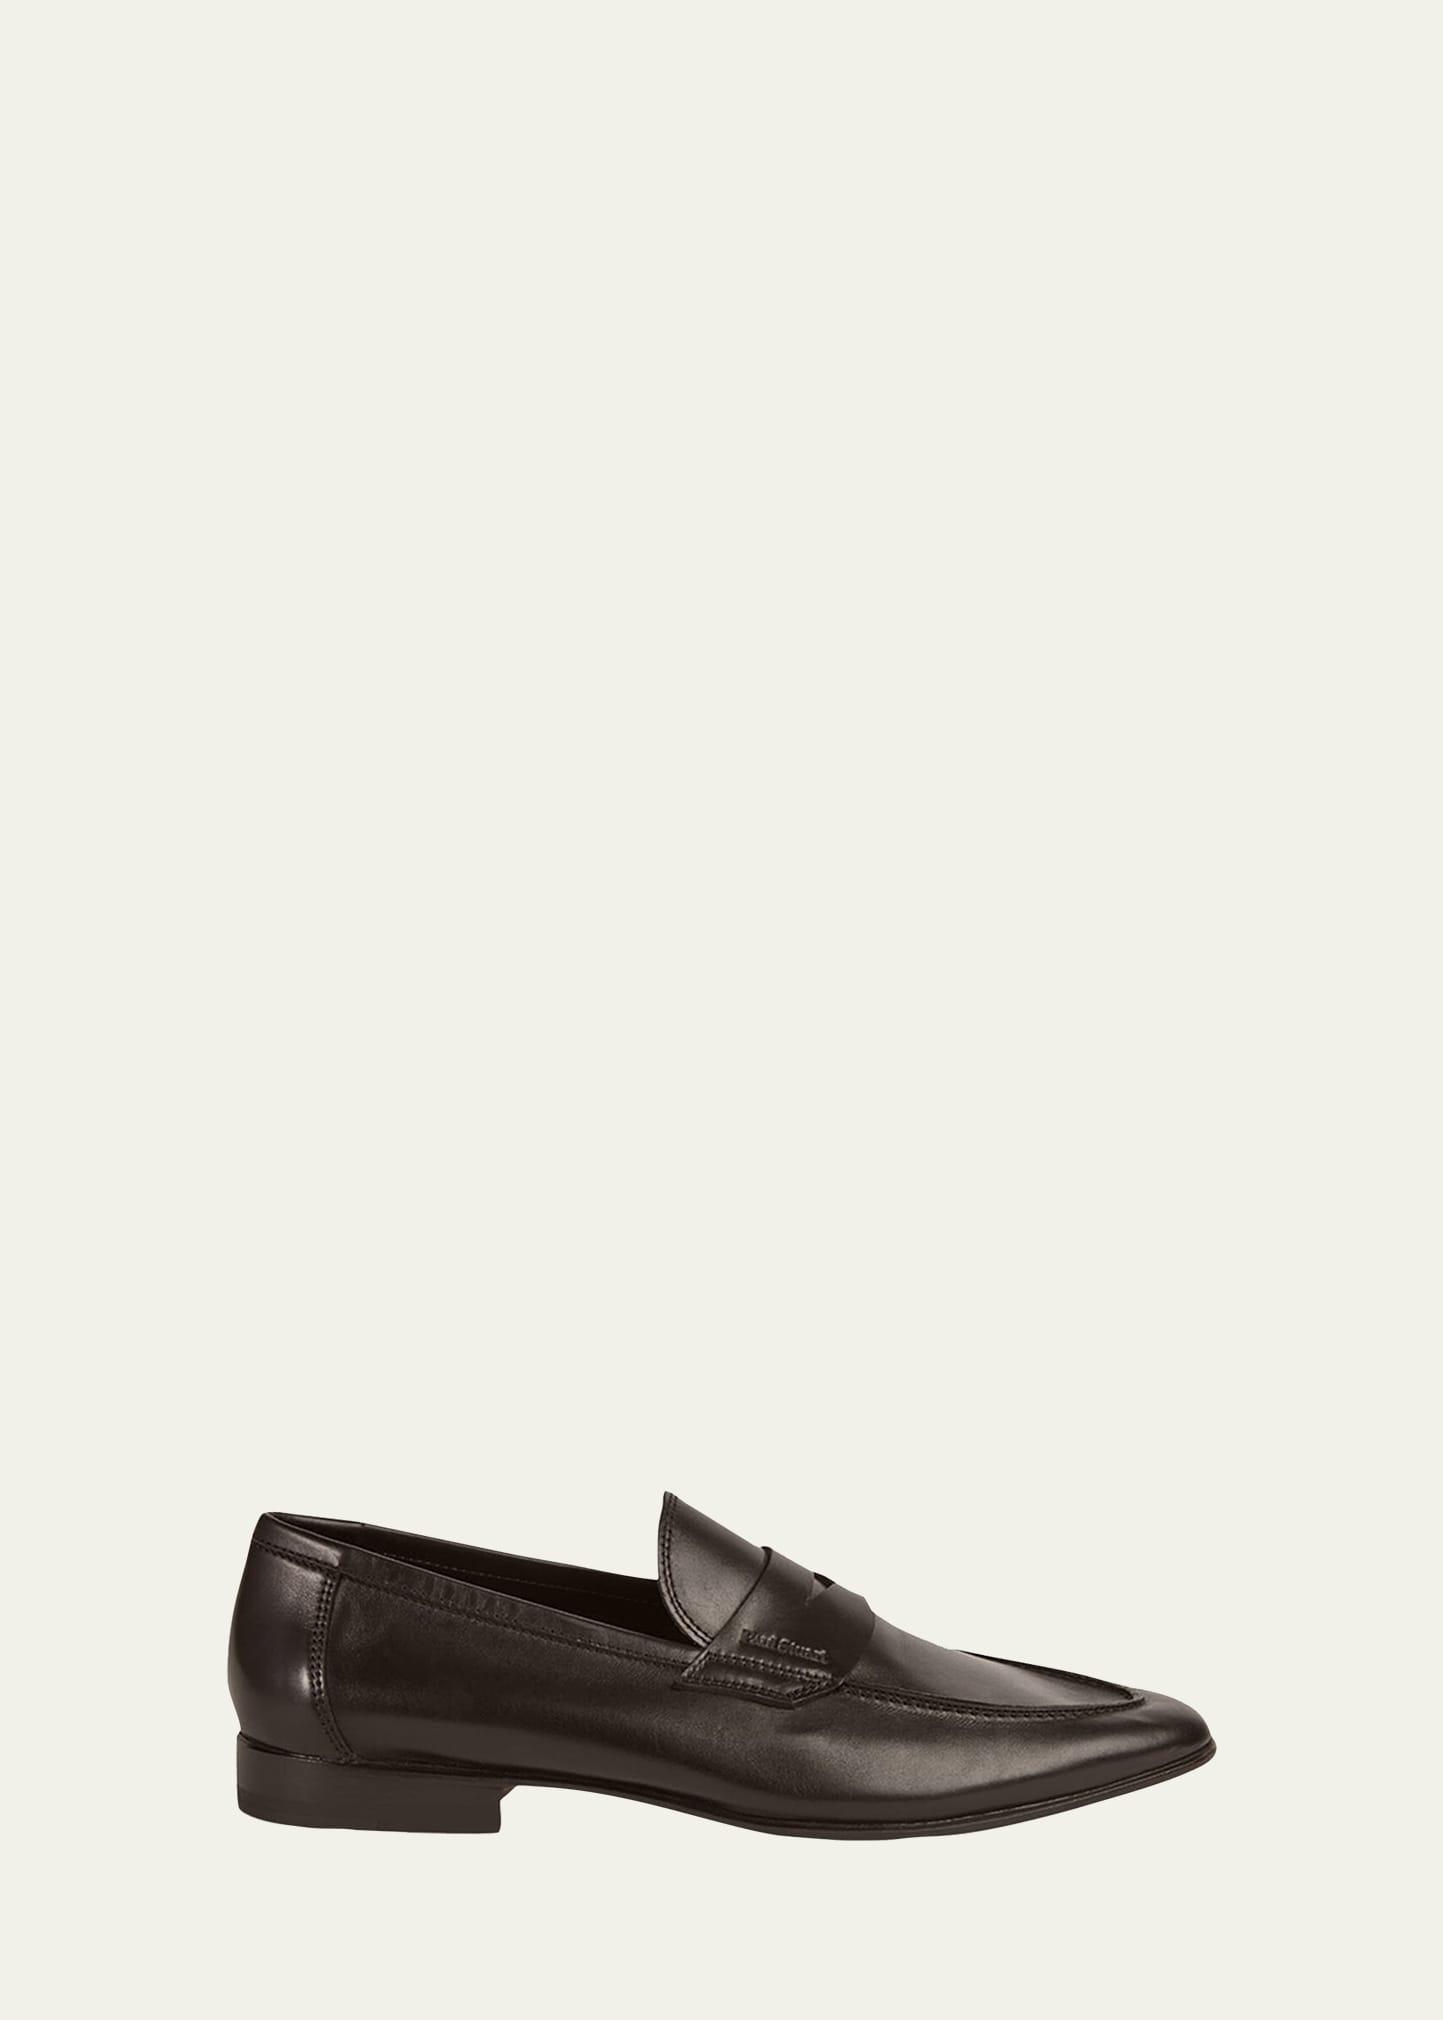 Paul Stuart Harlan Penny Loafer Product Image